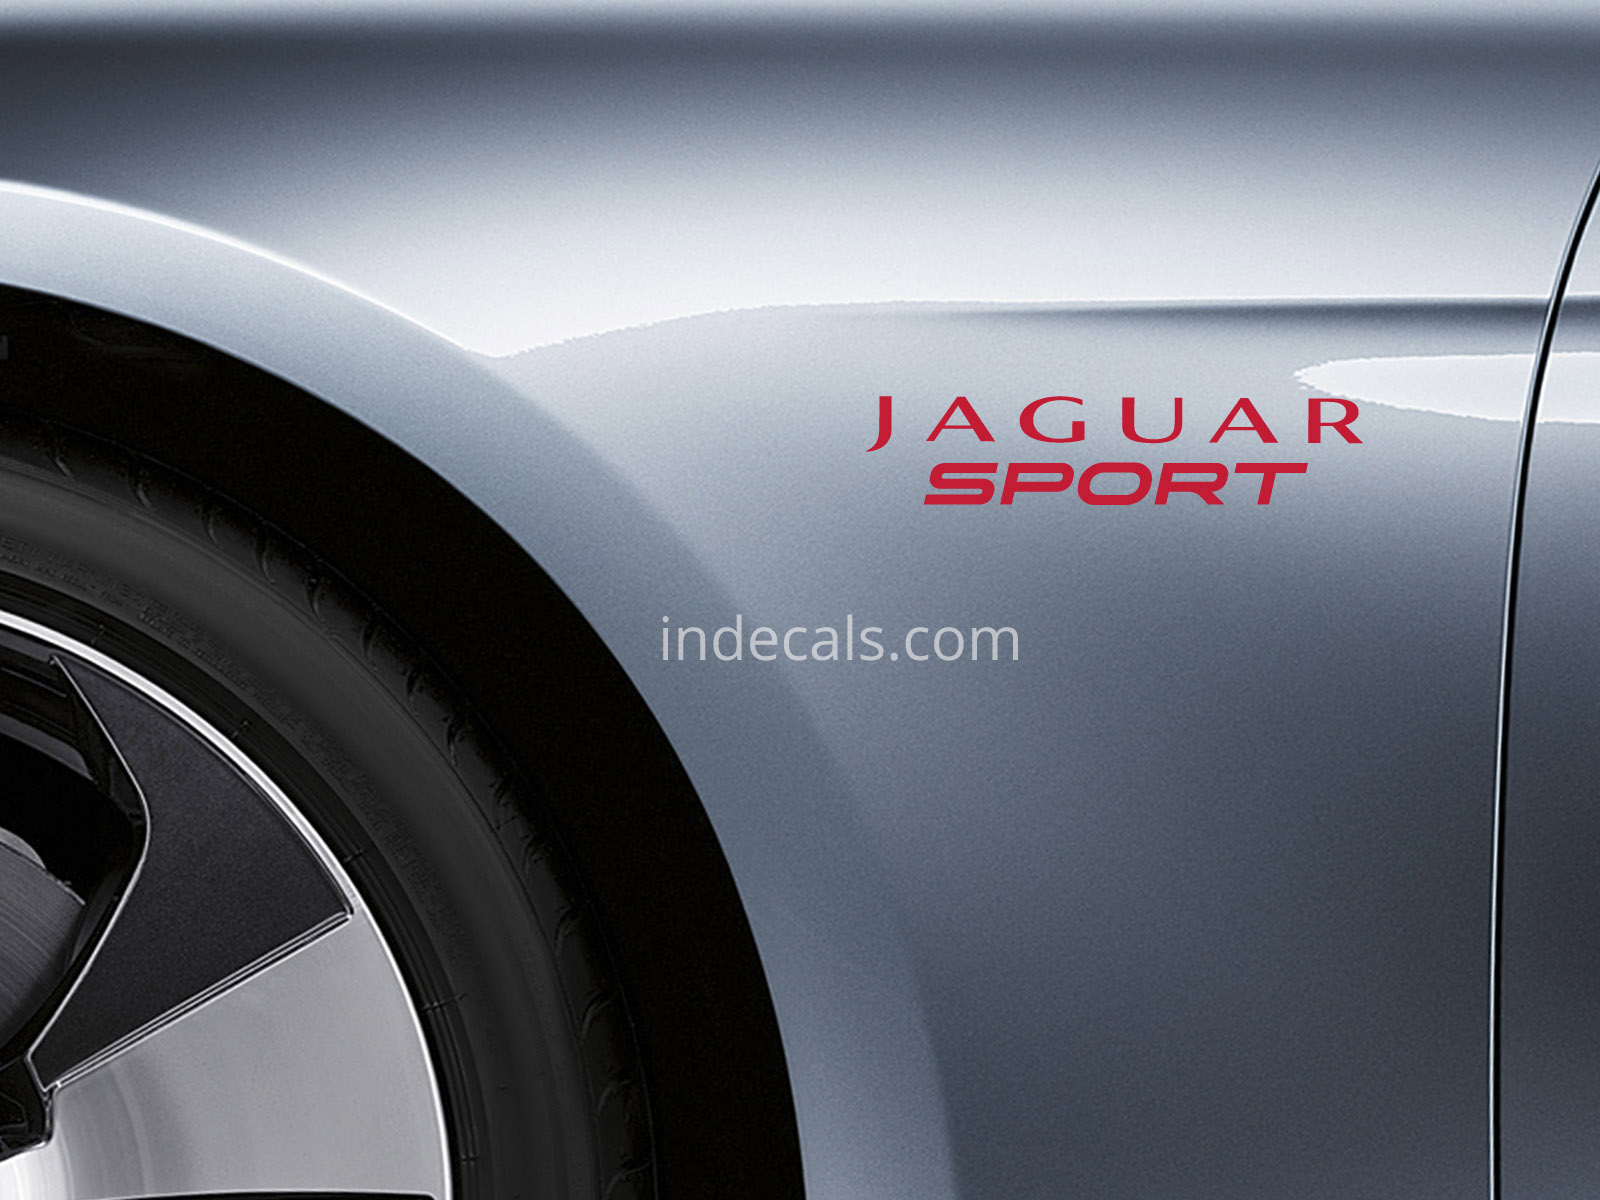 2 x Jaguar Sports stickers for Wings - Red